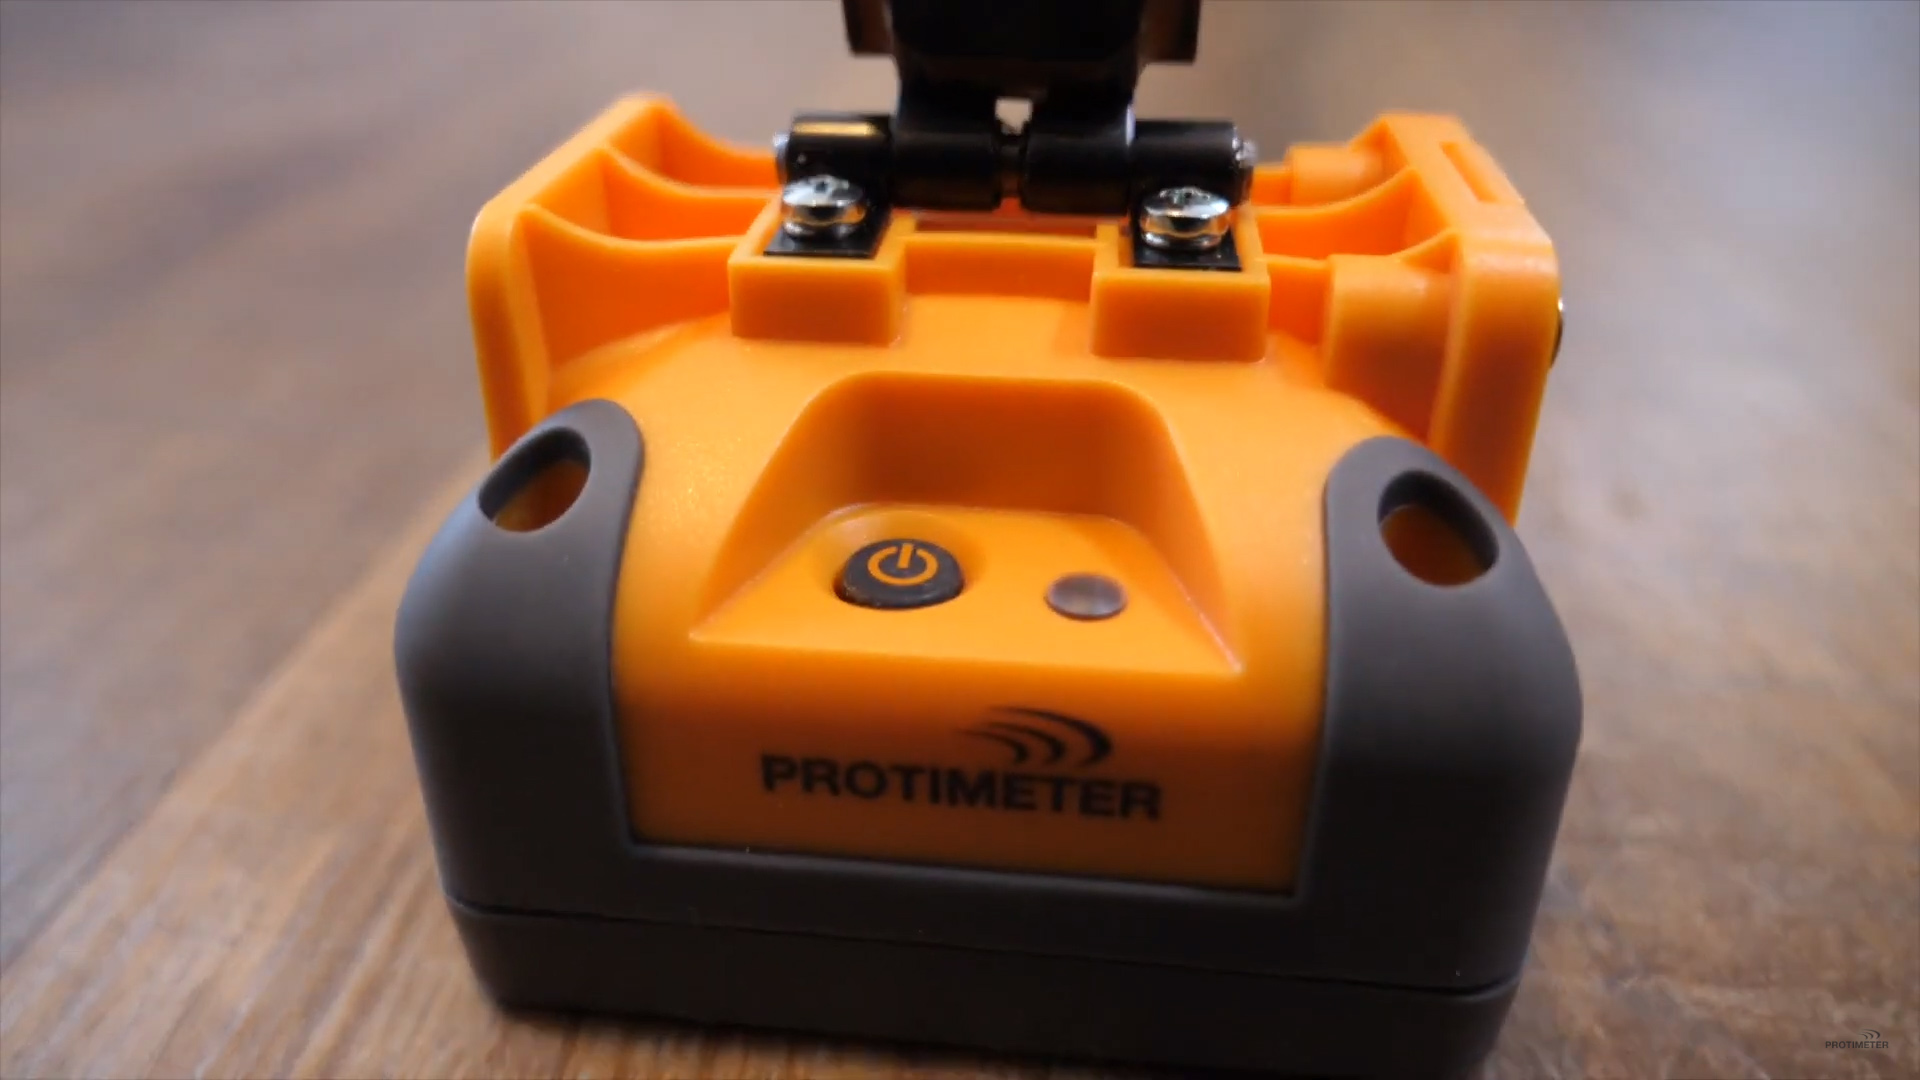 Protimeter ReachMaster Pro Moisture Meter close up of the device head.